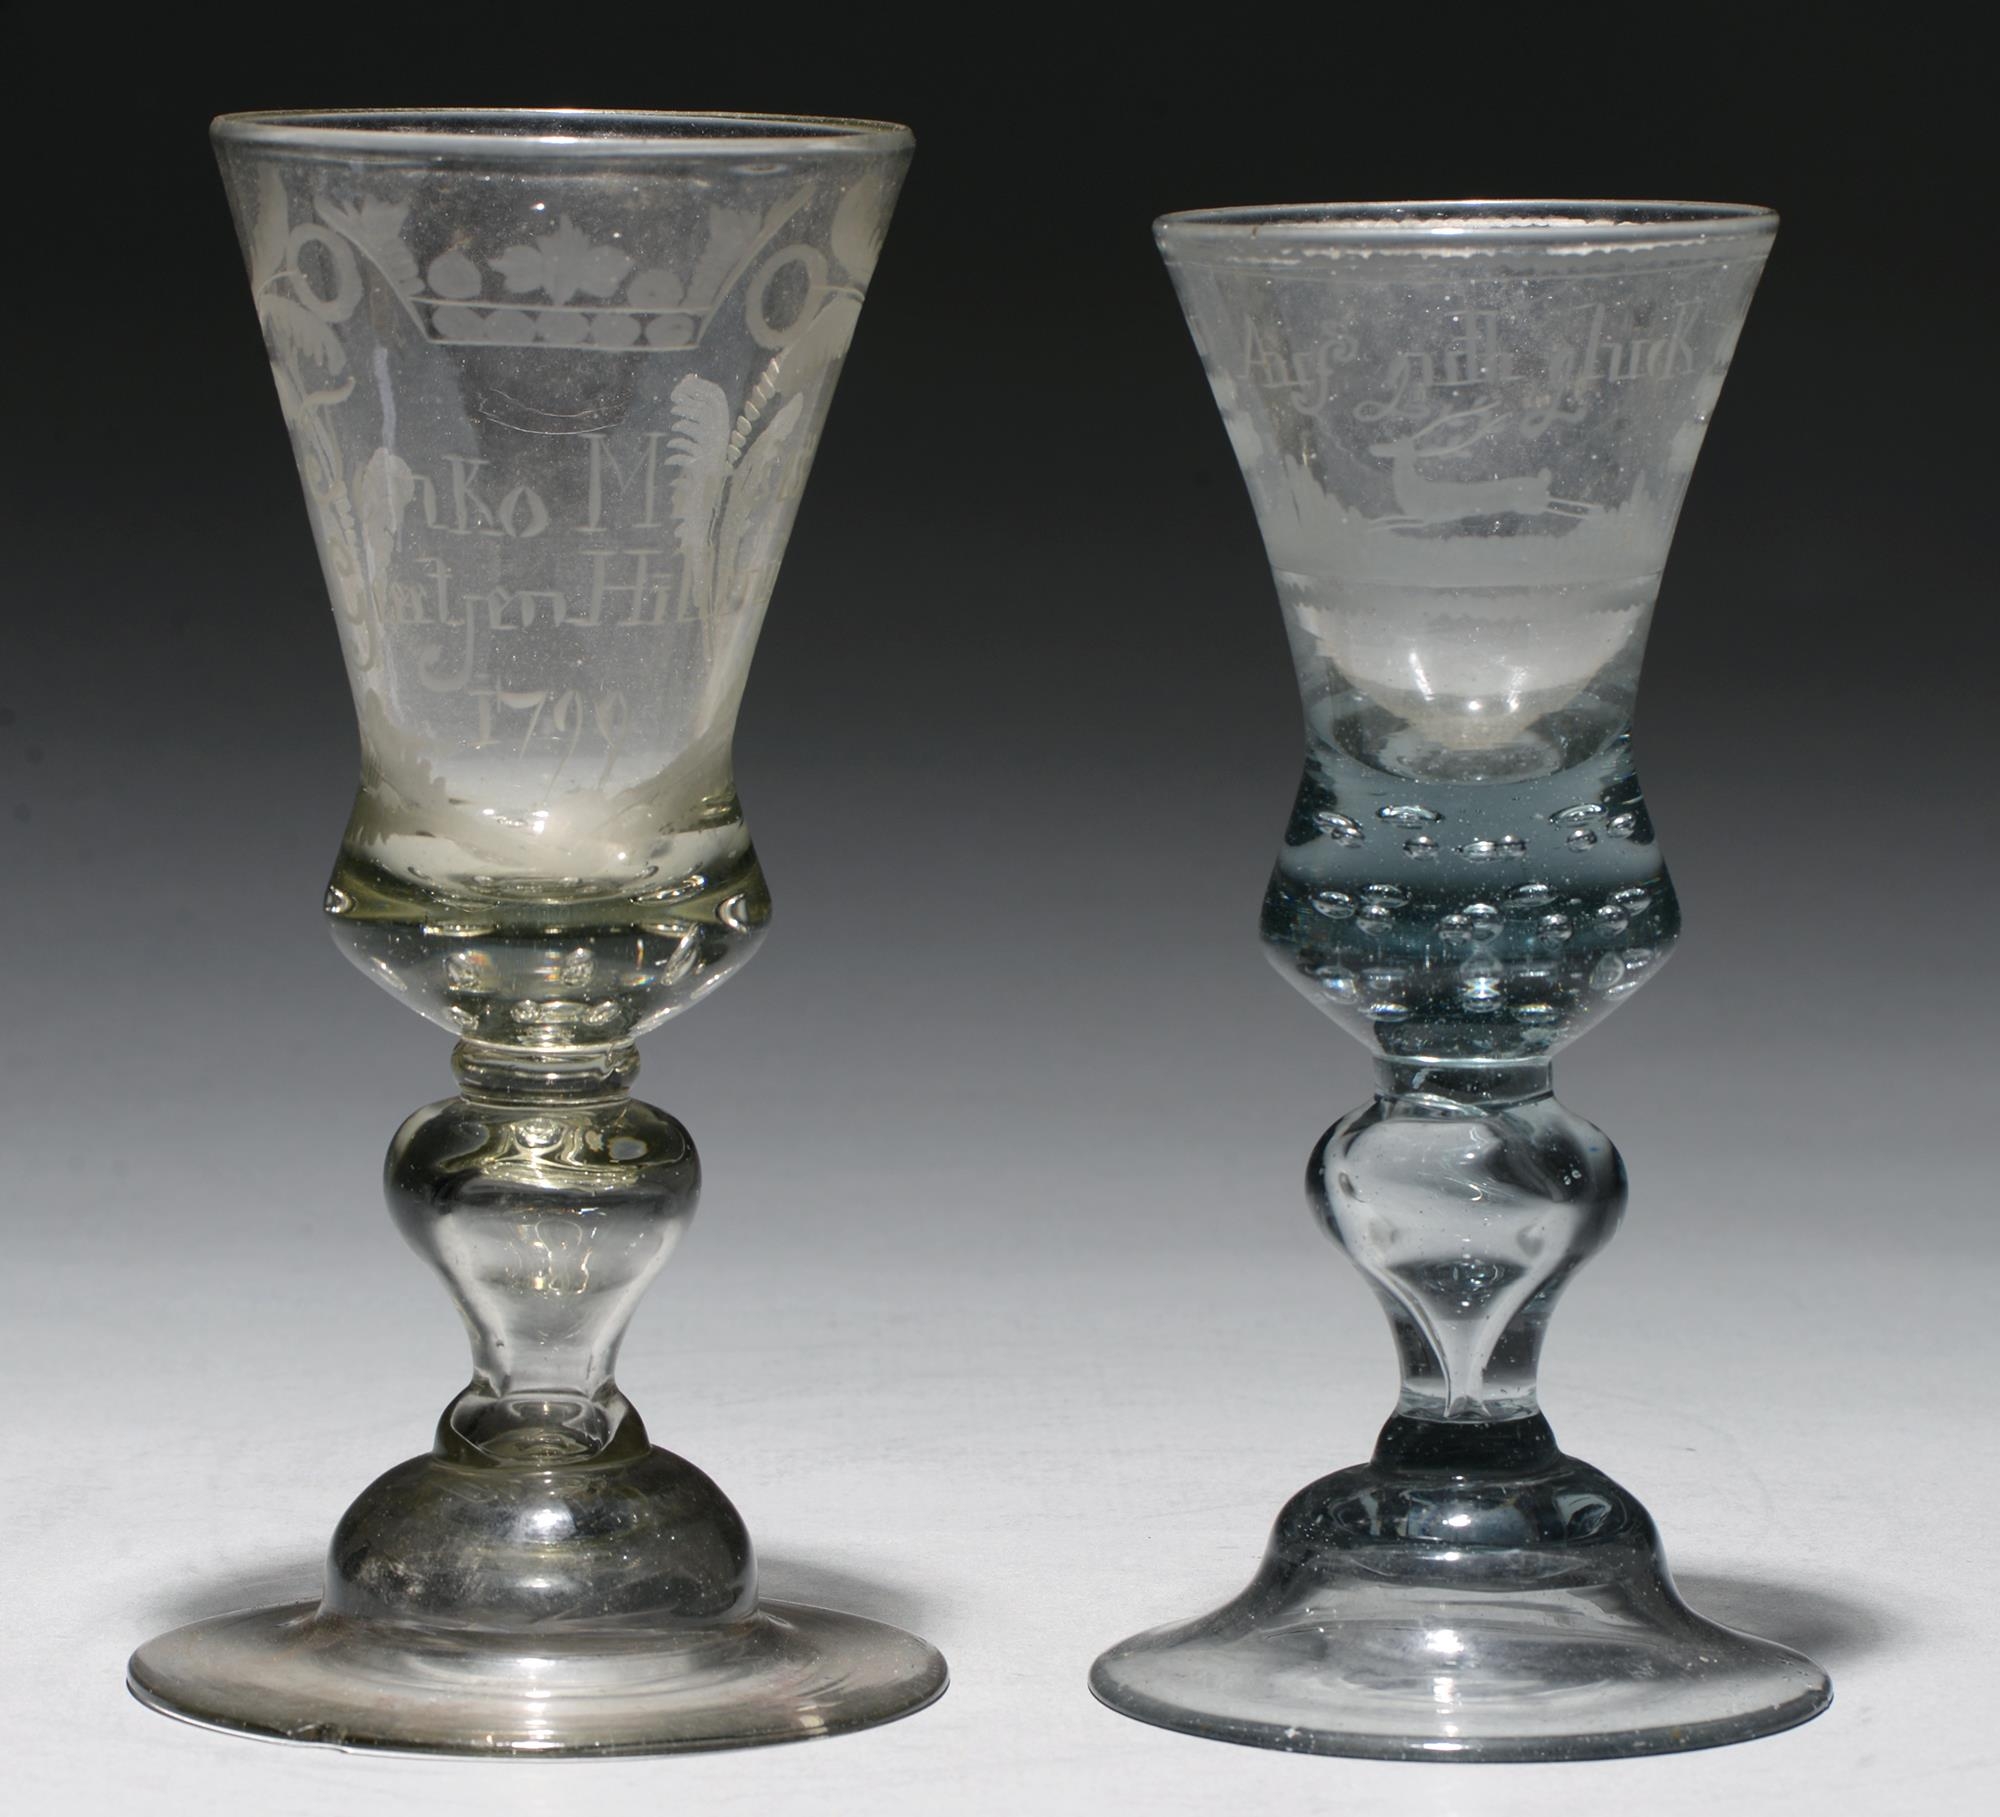 Two Bohemian glass goblets, late 18th c, soda metal, the thistle shaped bowl engraved with stag